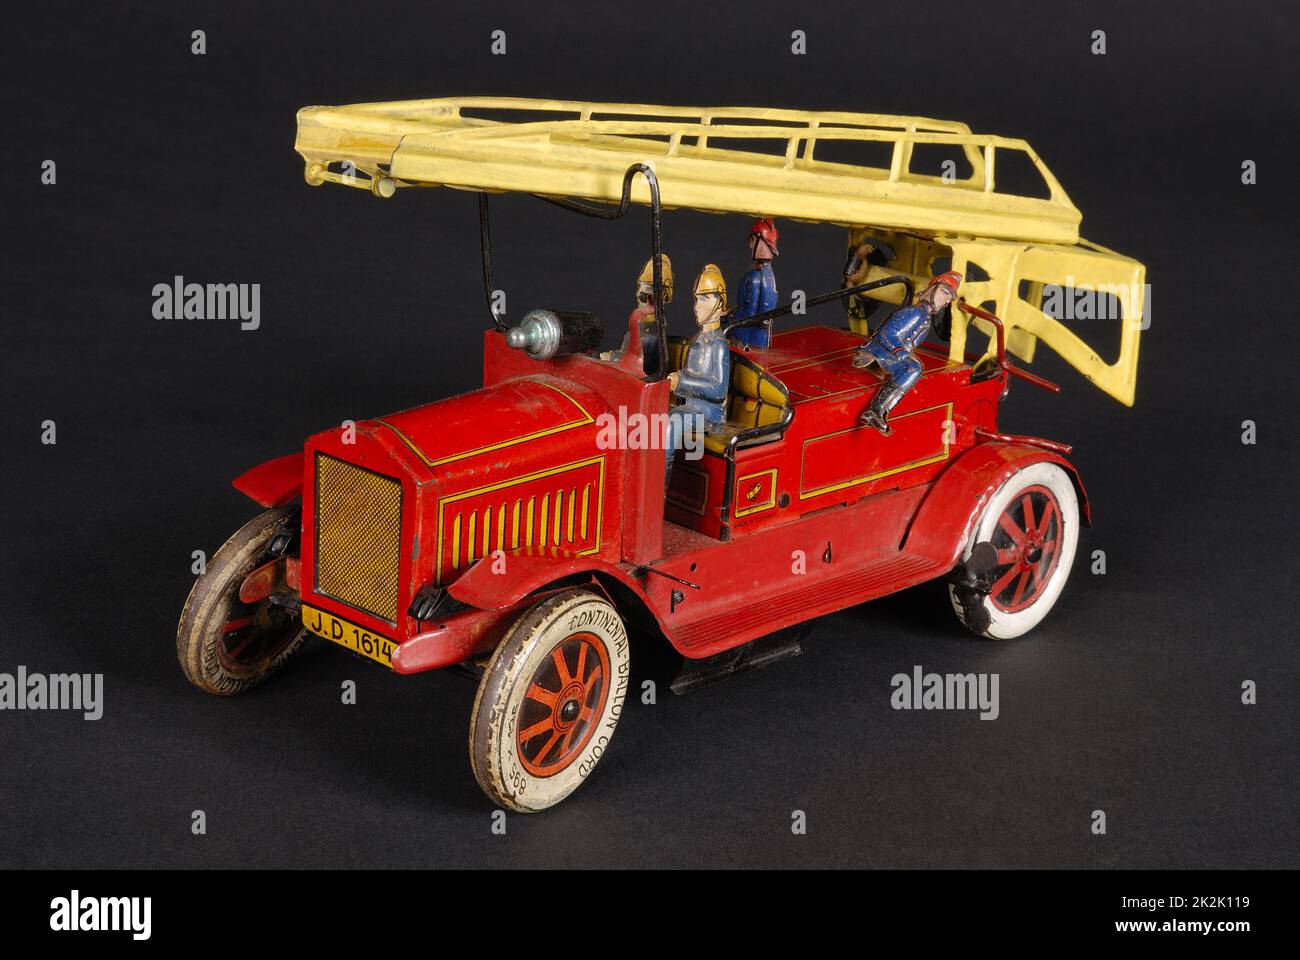 Toy from the british manufacturer J.D.N. Fire engine truck with ladder Tin plate toy Spring mechanism Length 23 cm 1940s Private collection Stock Photo